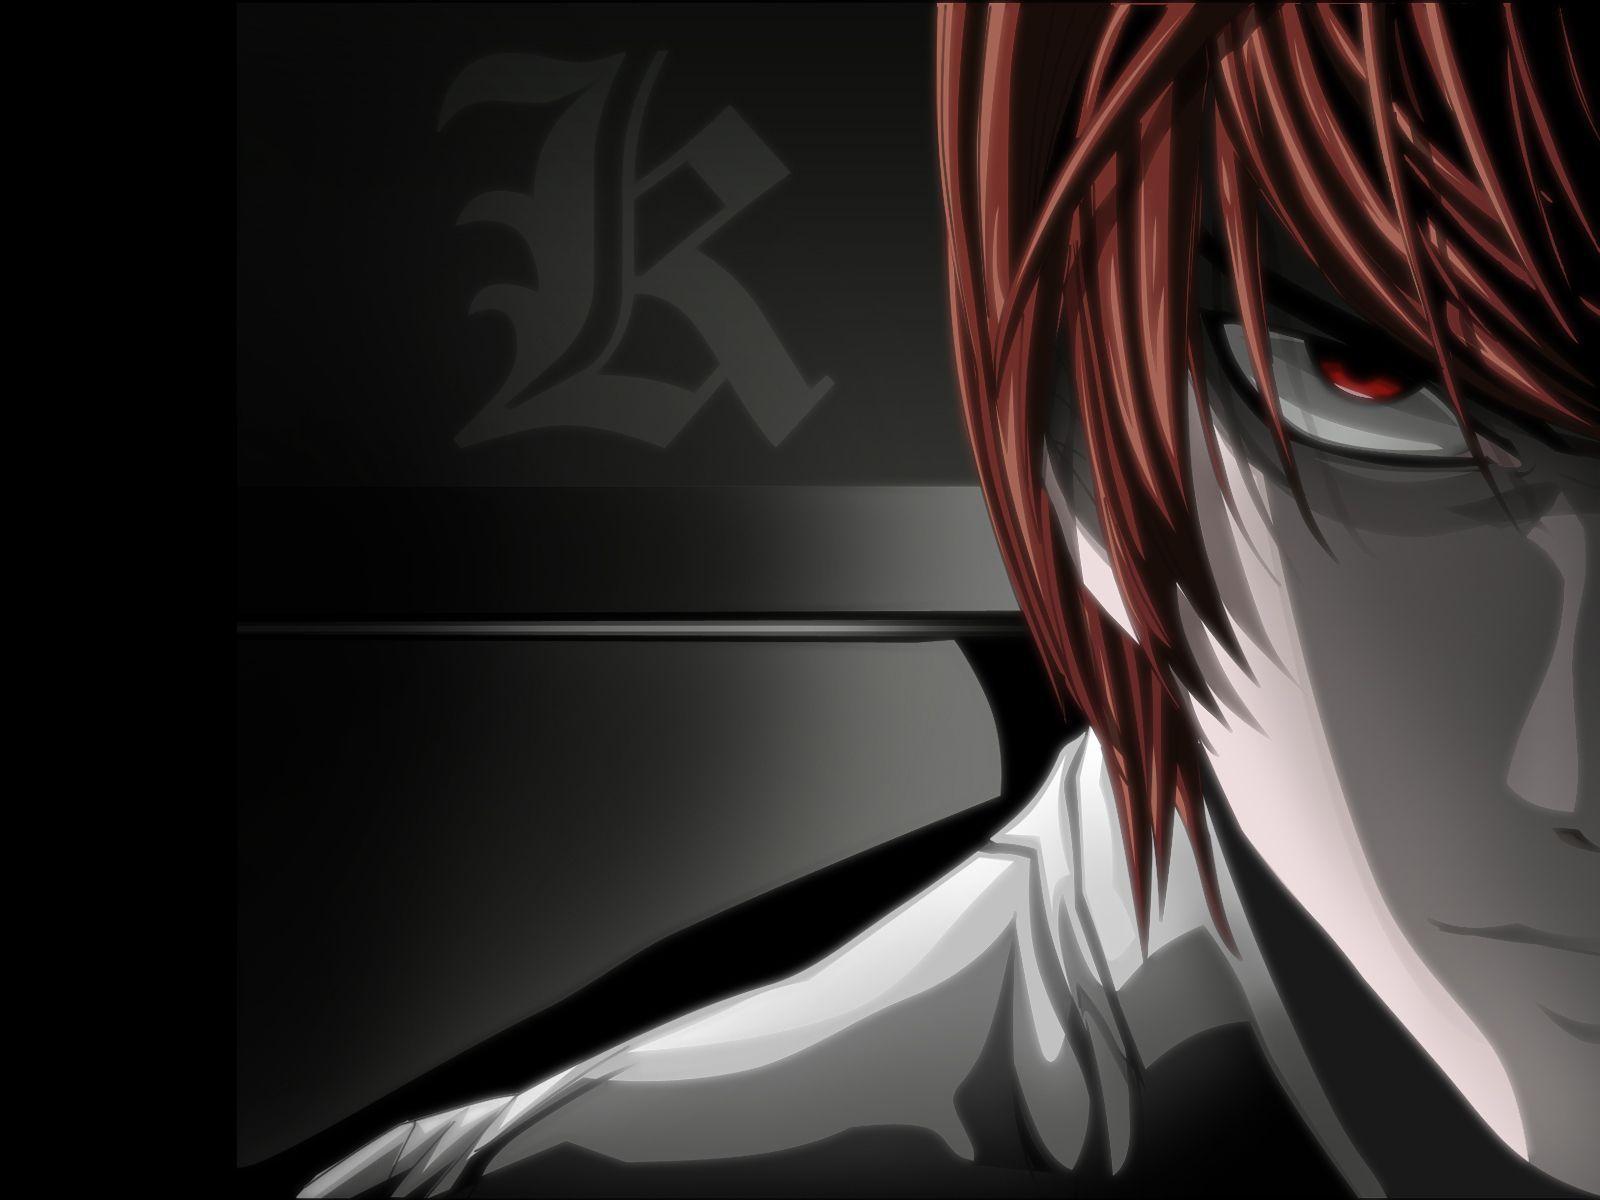 Light Yagami Wallpapers - Wallpaper Cave